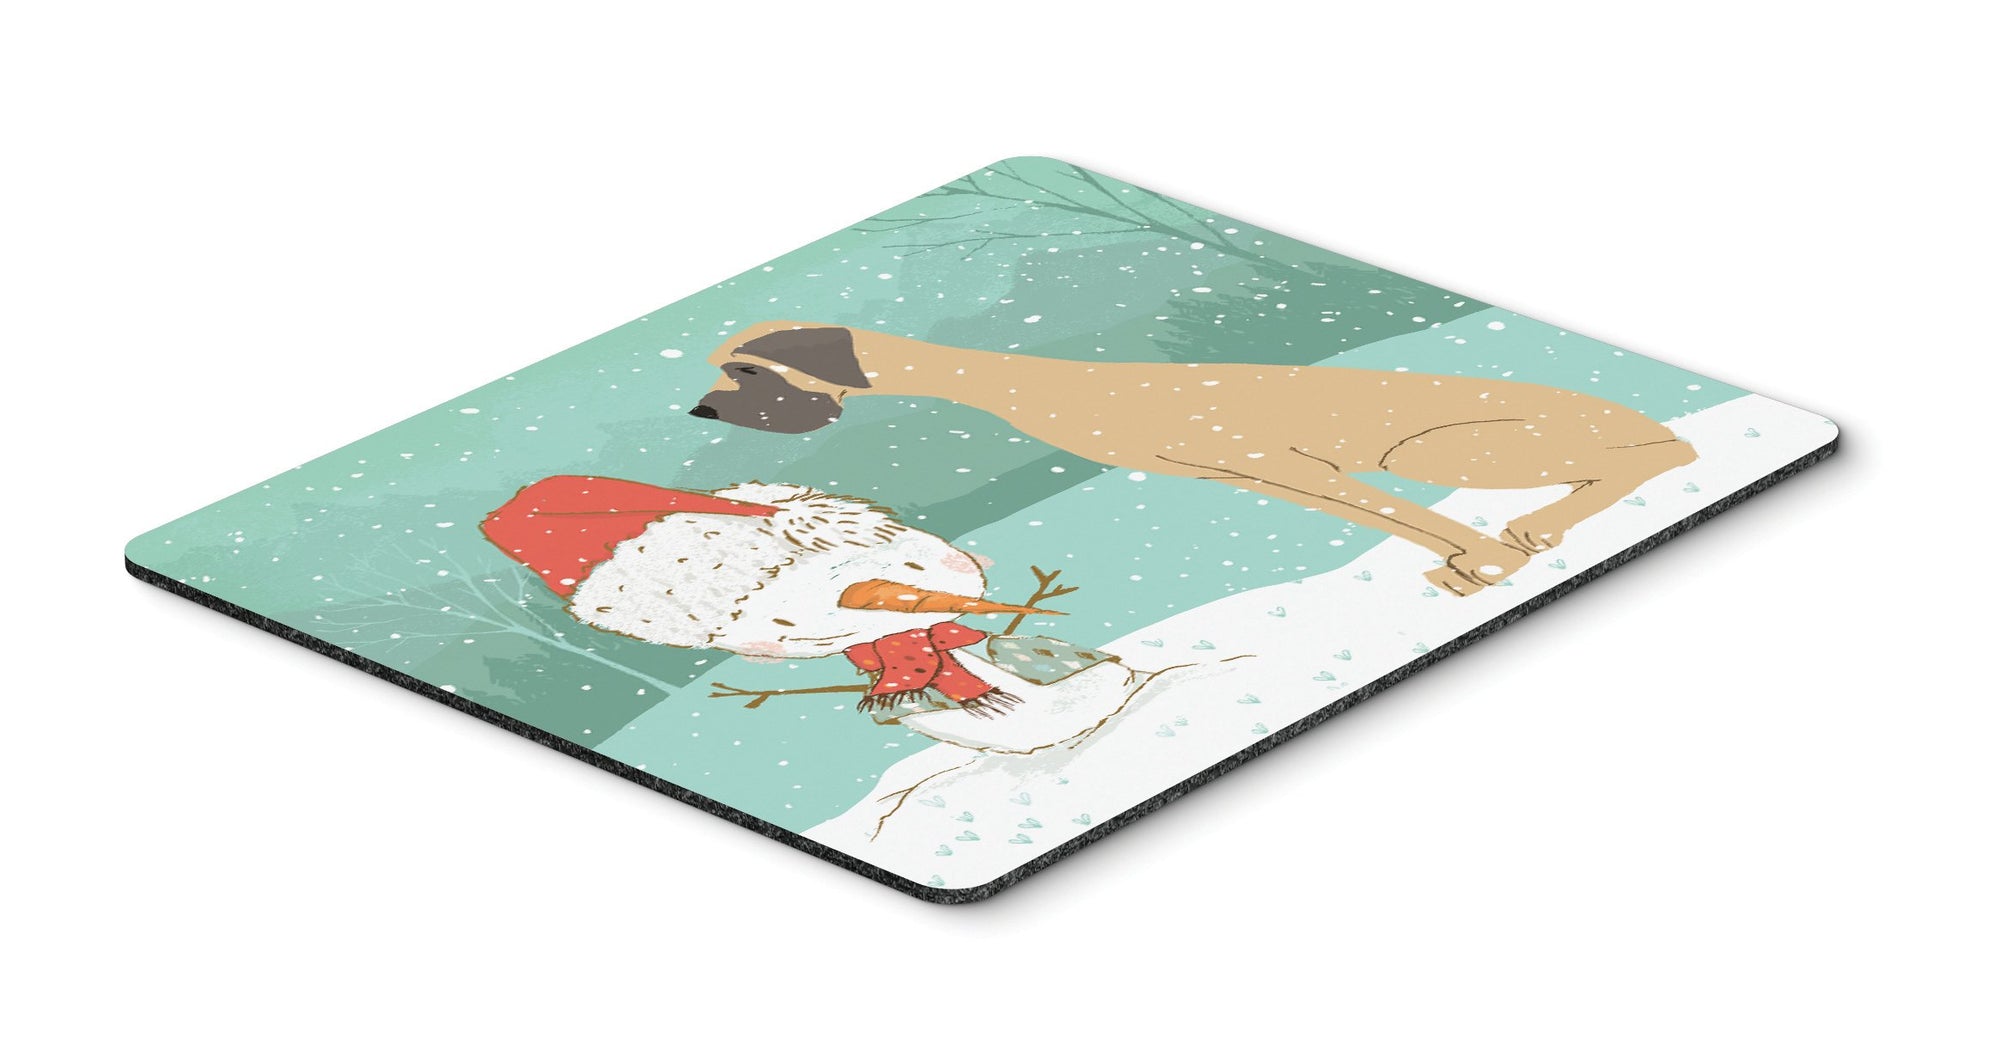 Fawn Natural Great Dane Snowman Christmas Mouse Pad, Hot Pad or Trivet CK2040MP by Caroline's Treasures